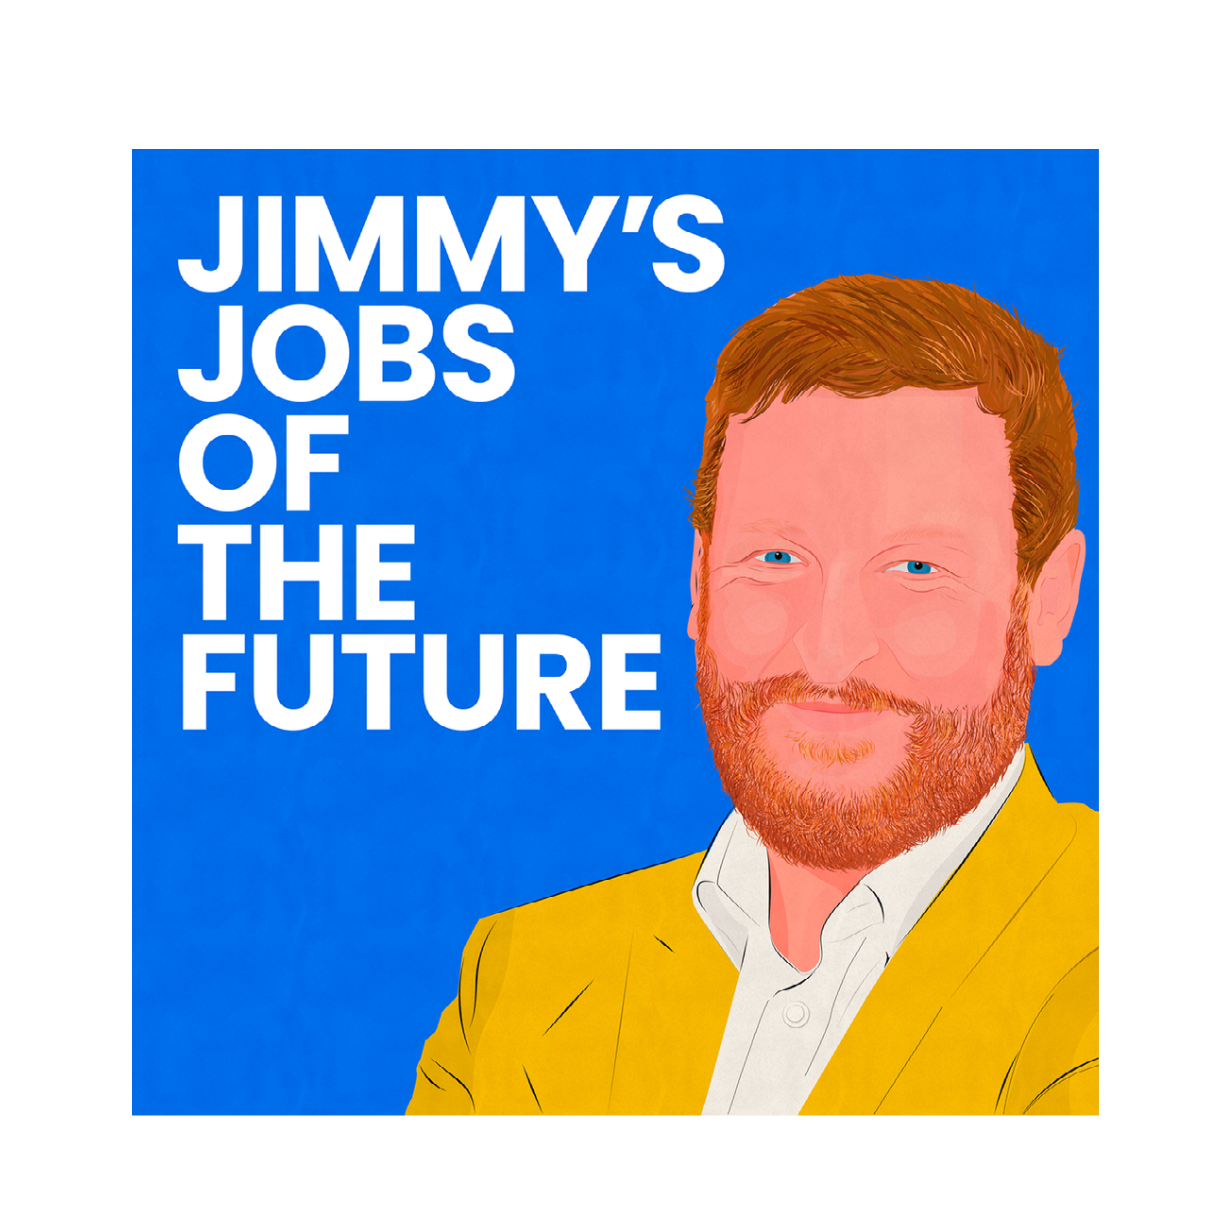 Jimmys Jobs of the Future